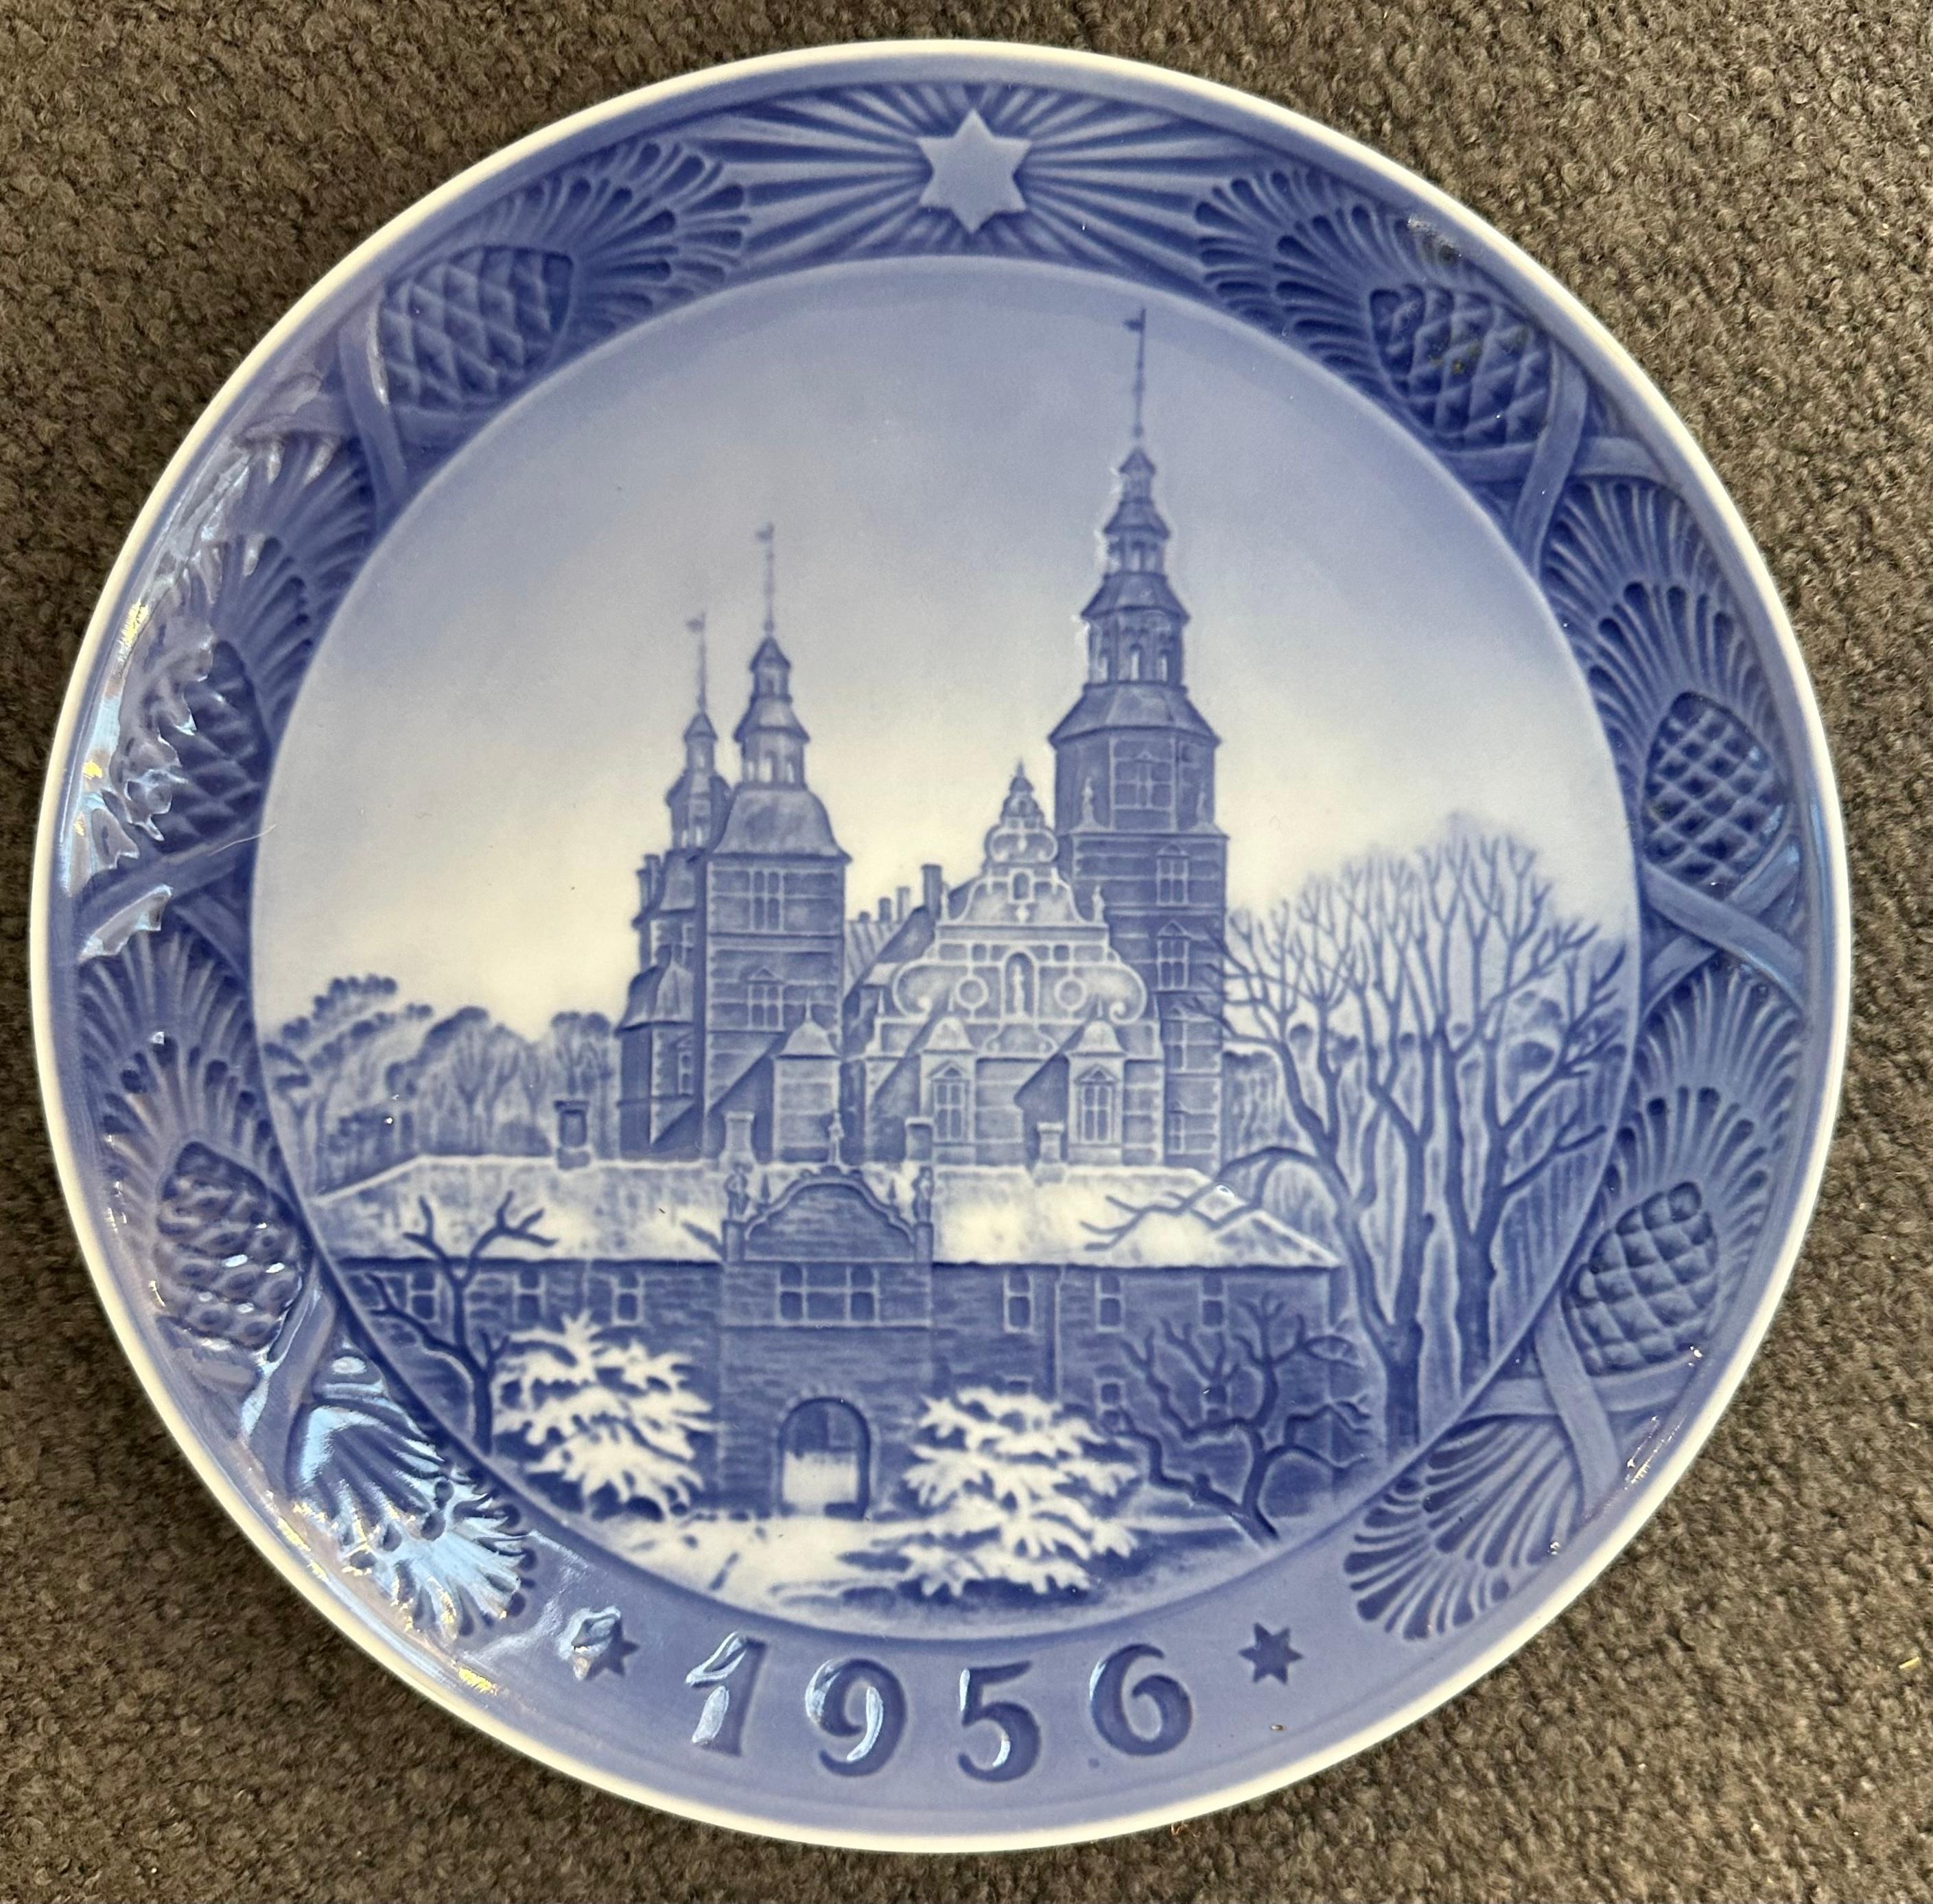 This glazed porcelain plate is the Royal Copenhagen Christmas 1956 issue depicting the Rosenborg Castle in the centre of Copenhagen.  Designed and stamped on the reverse Kai Lange. The Castle was built by King Christian IV as his summer residence in